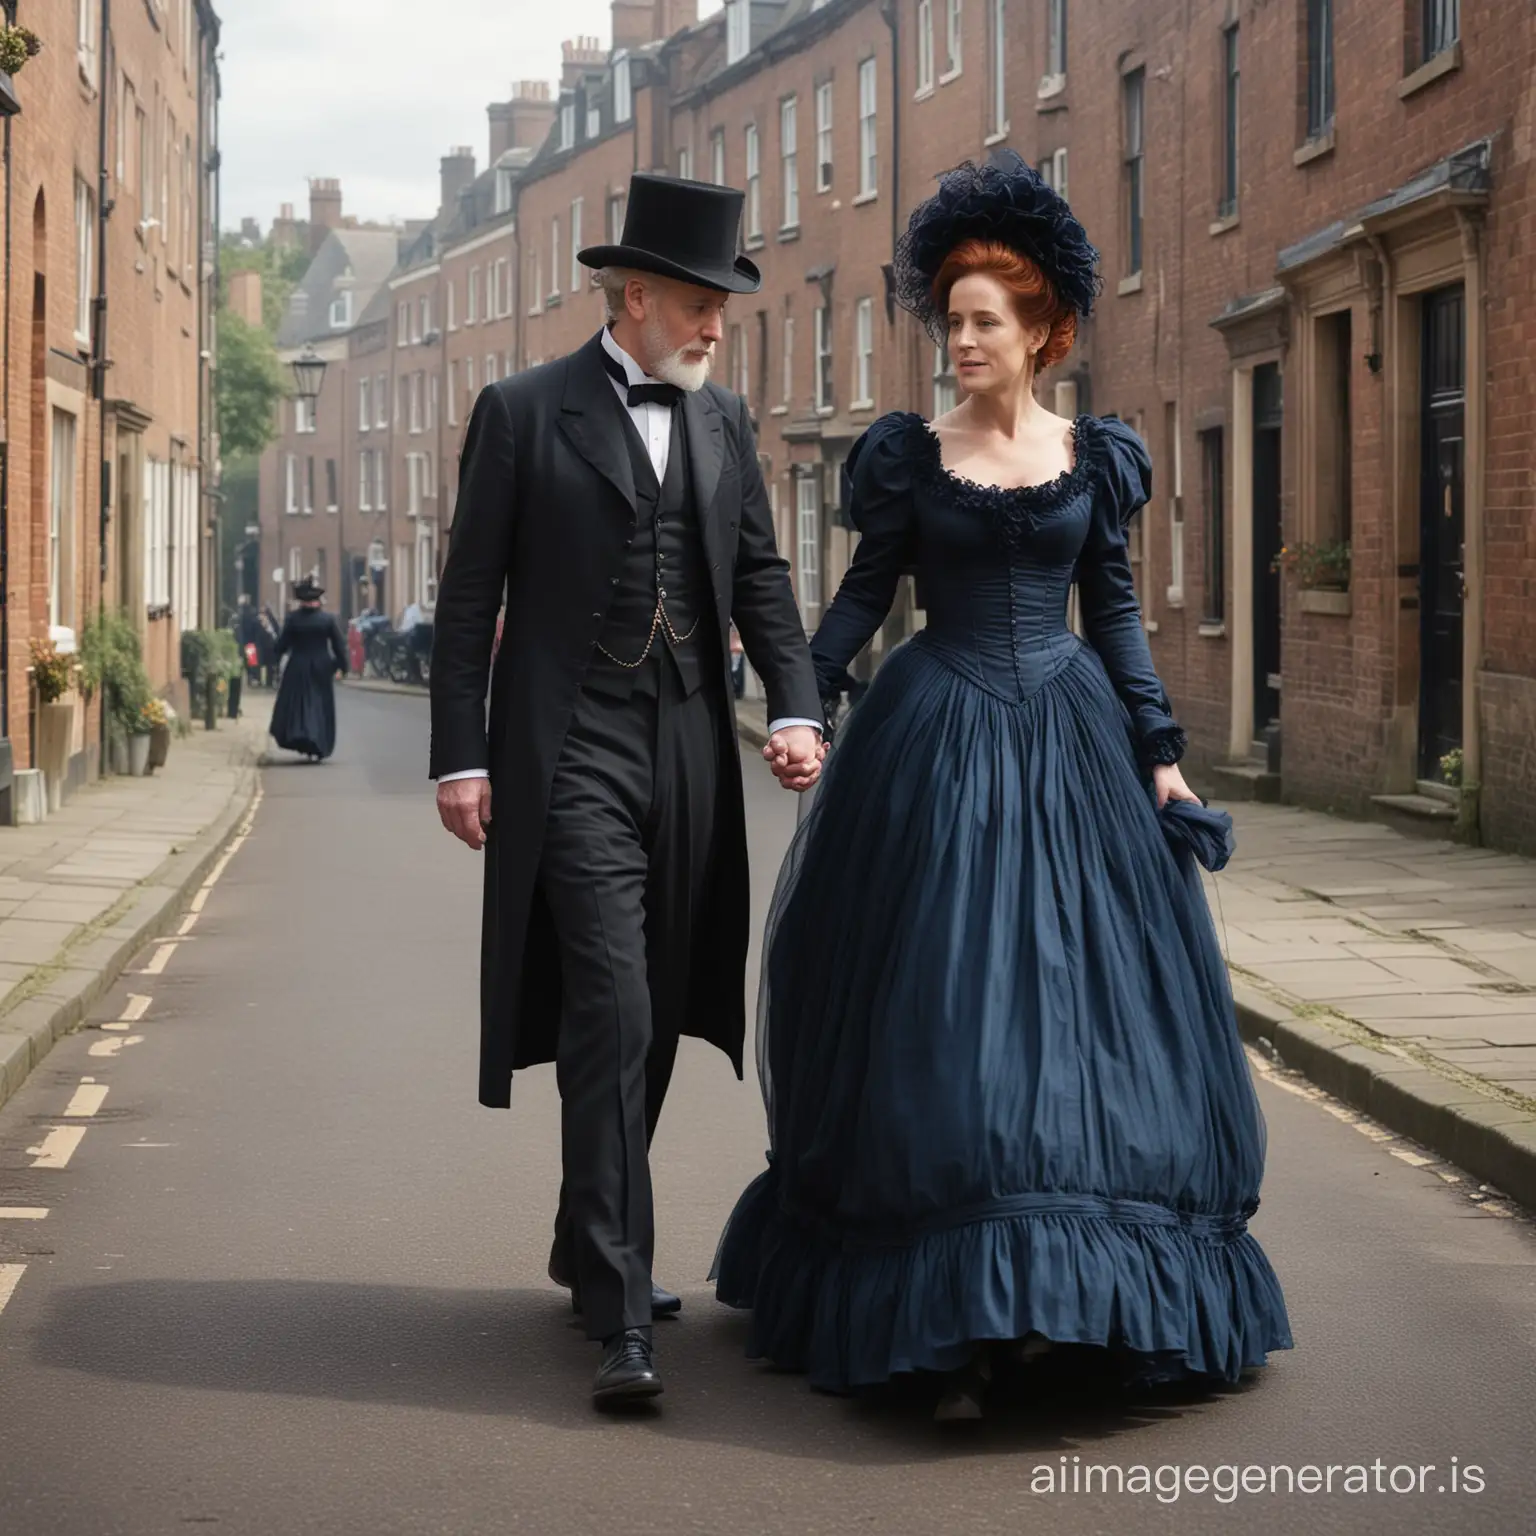 red hair Gillian Anderson wearing a dark blue floor-length loose billowing 1860 victorian crinoline poofy dress with a frilly bonnet walking on a vitorian era street with an old man dressed into a black victorian suit who seems to be her newlywed husband